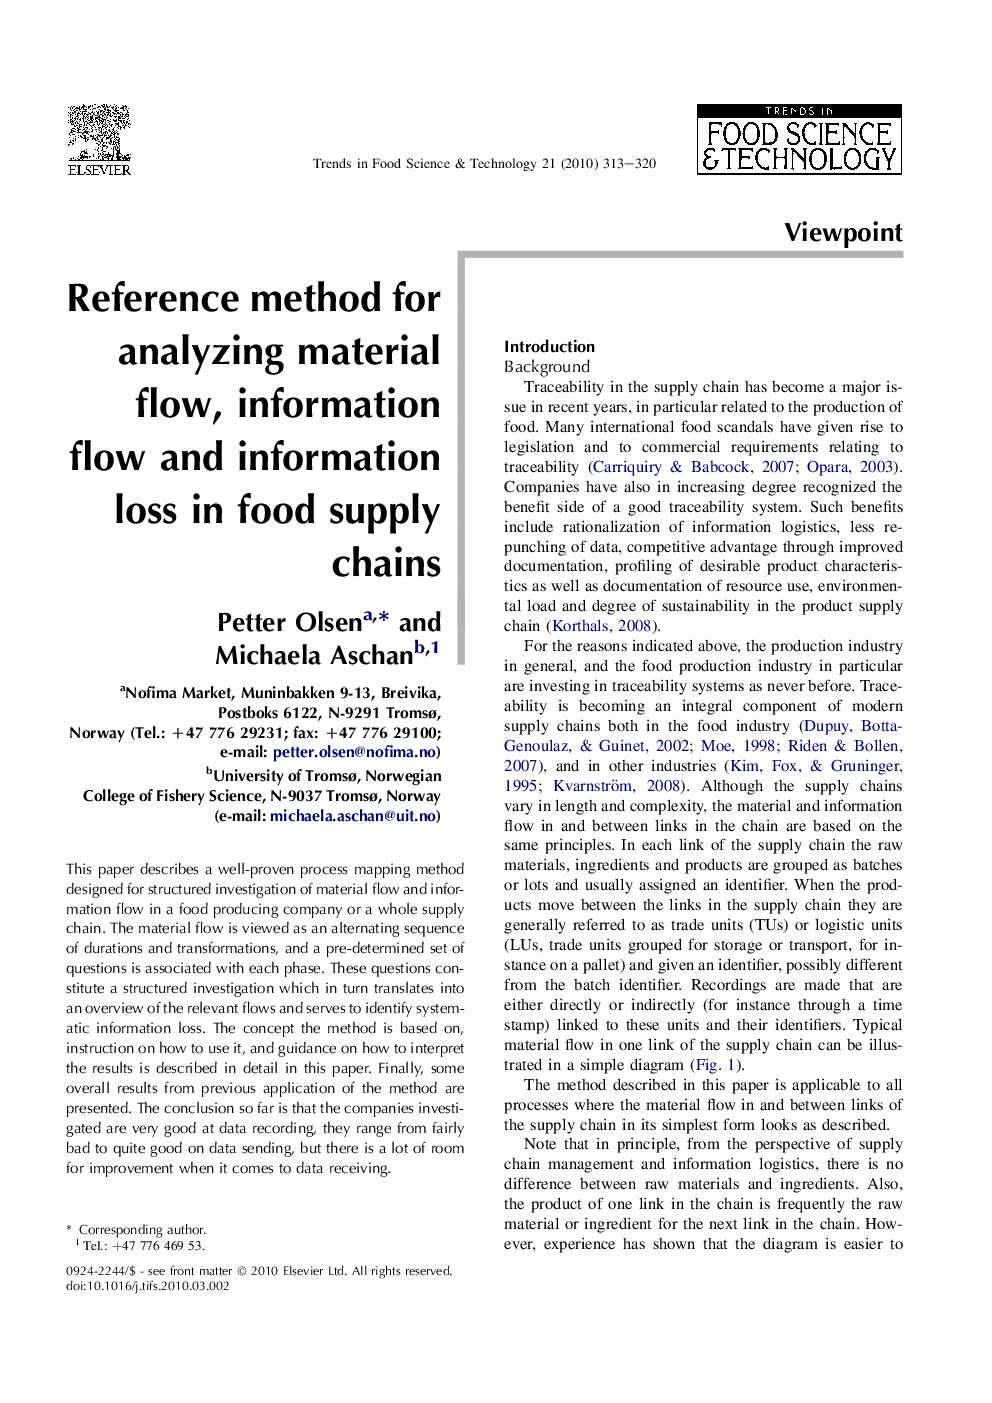 Reference method for analyzing material flow, information flow and information loss in food supply chains